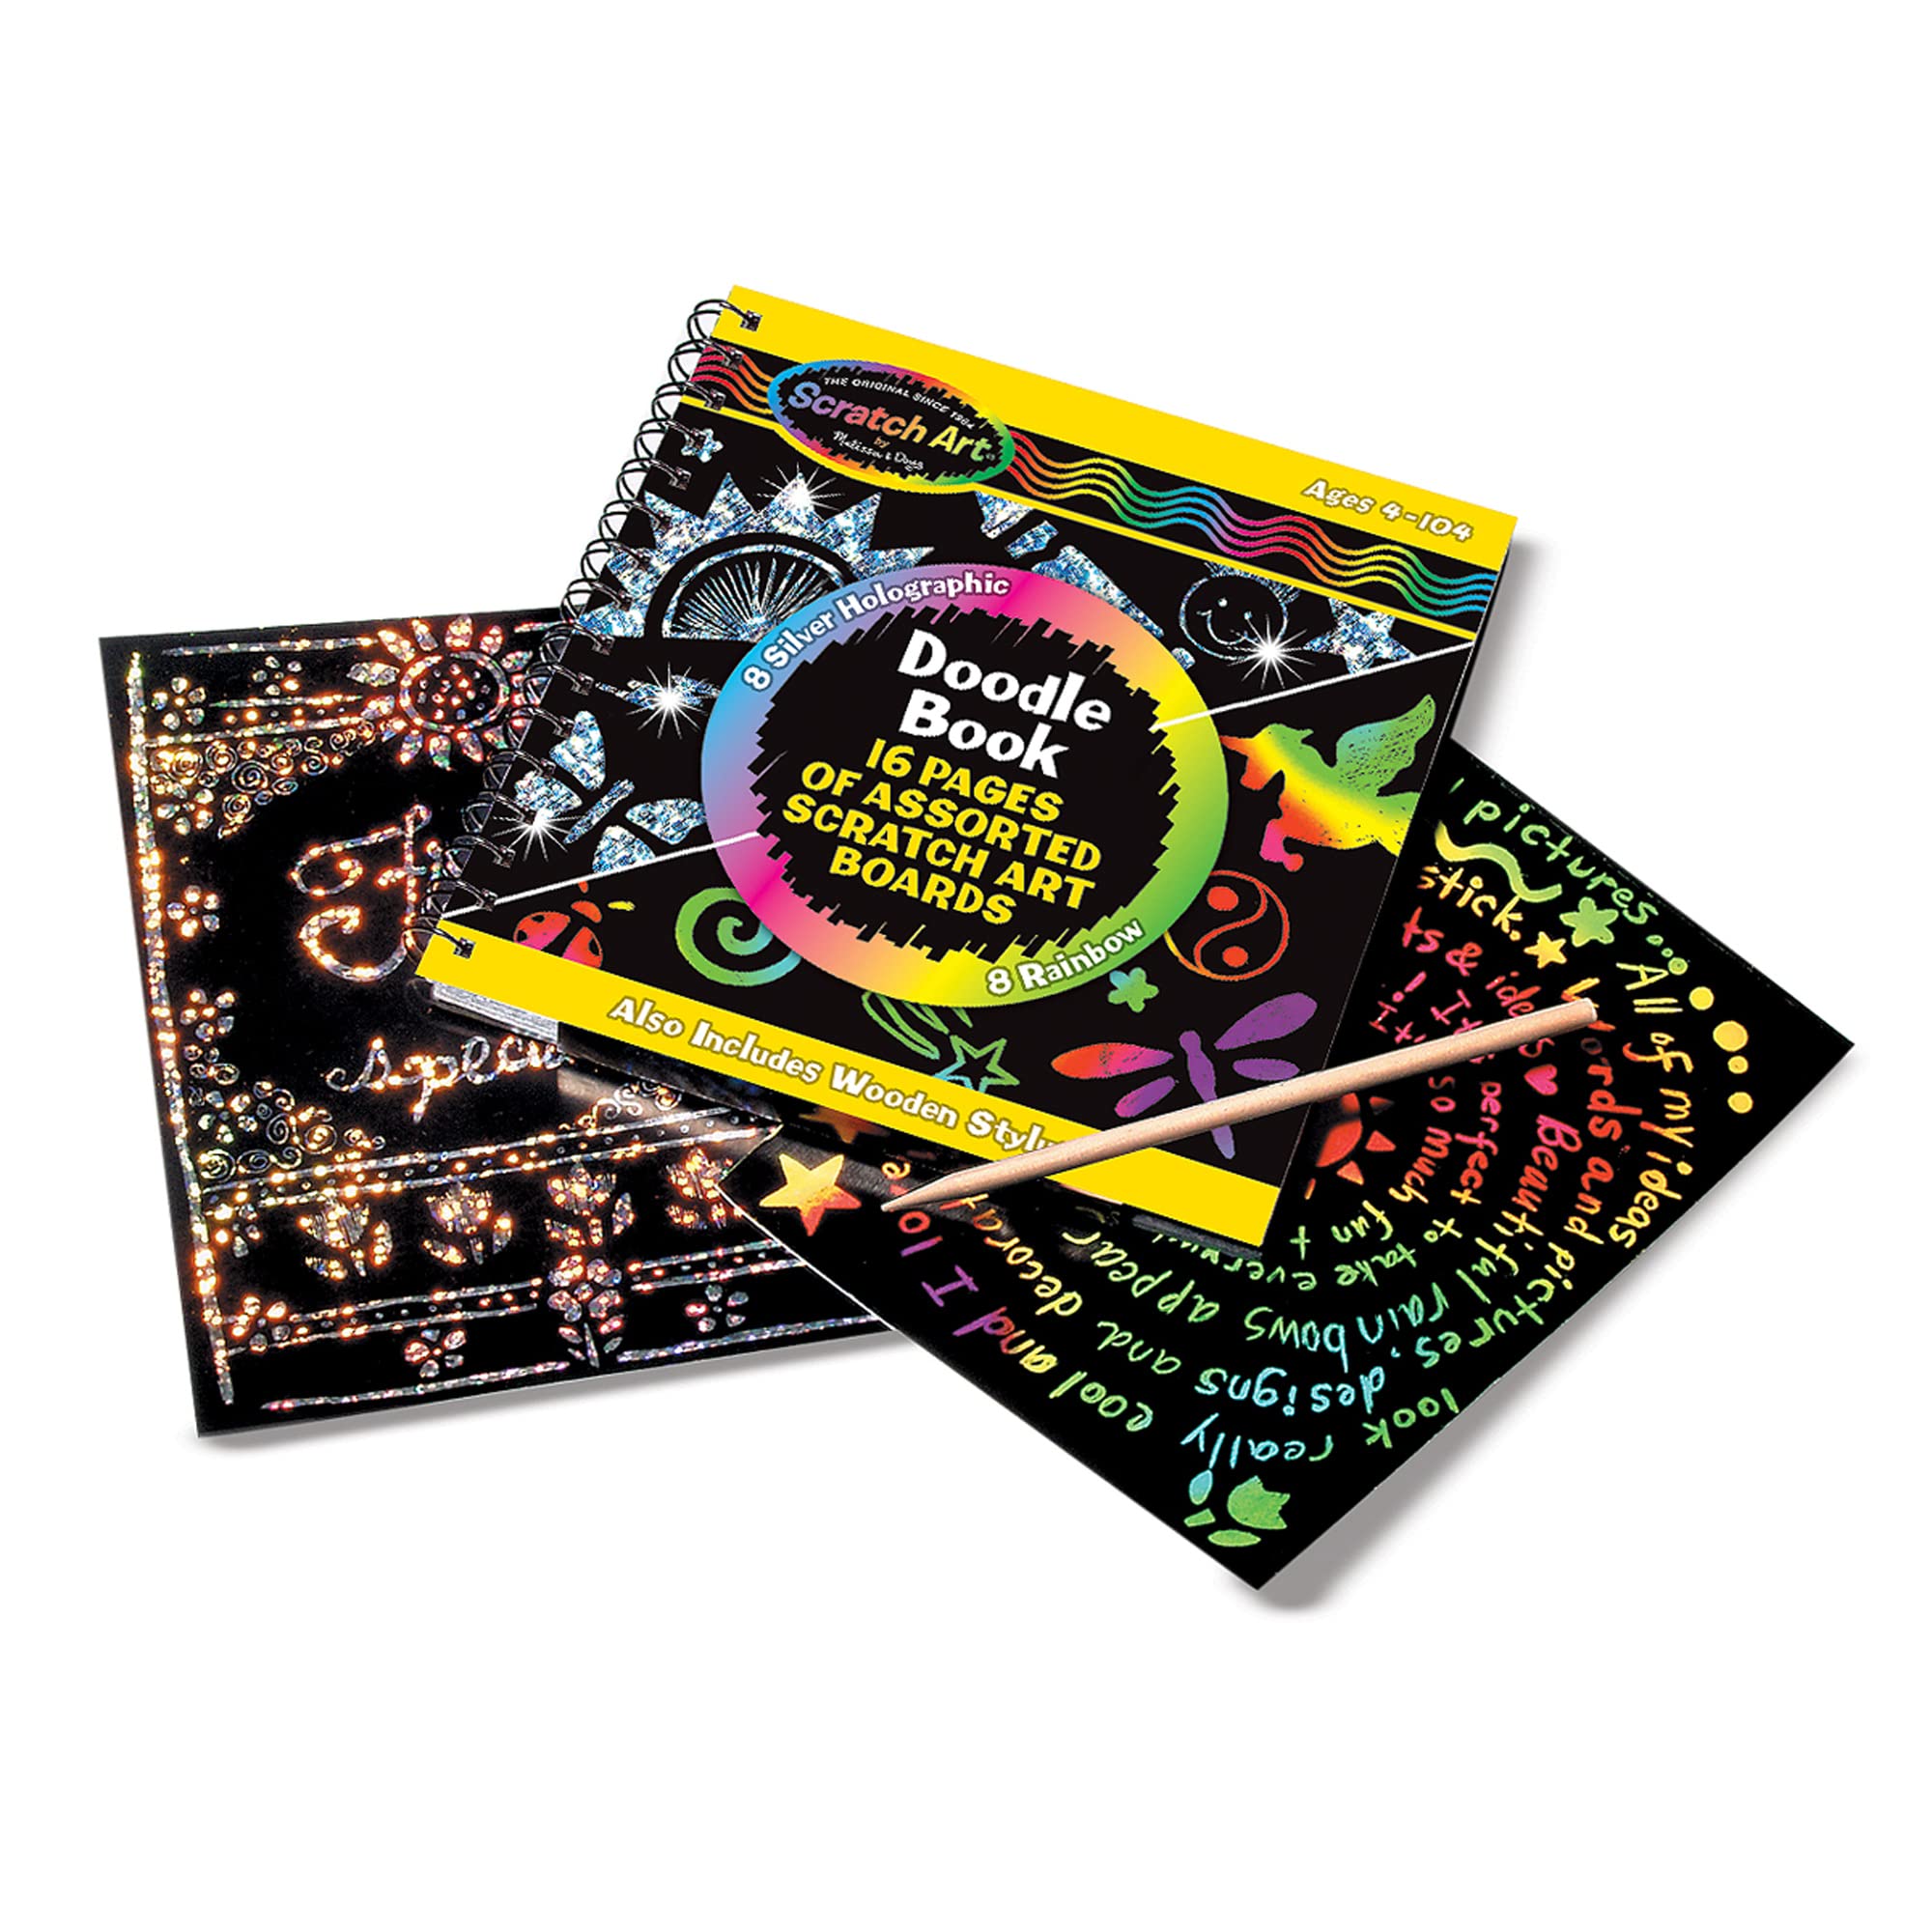 Book Cover Melissa & Doug Scratch Art Doodle Pad With 16 Scratch-Art Boards and Wooden Stylus - Color Scratch Pads, Arts And Crafts For Kids Ages 4+